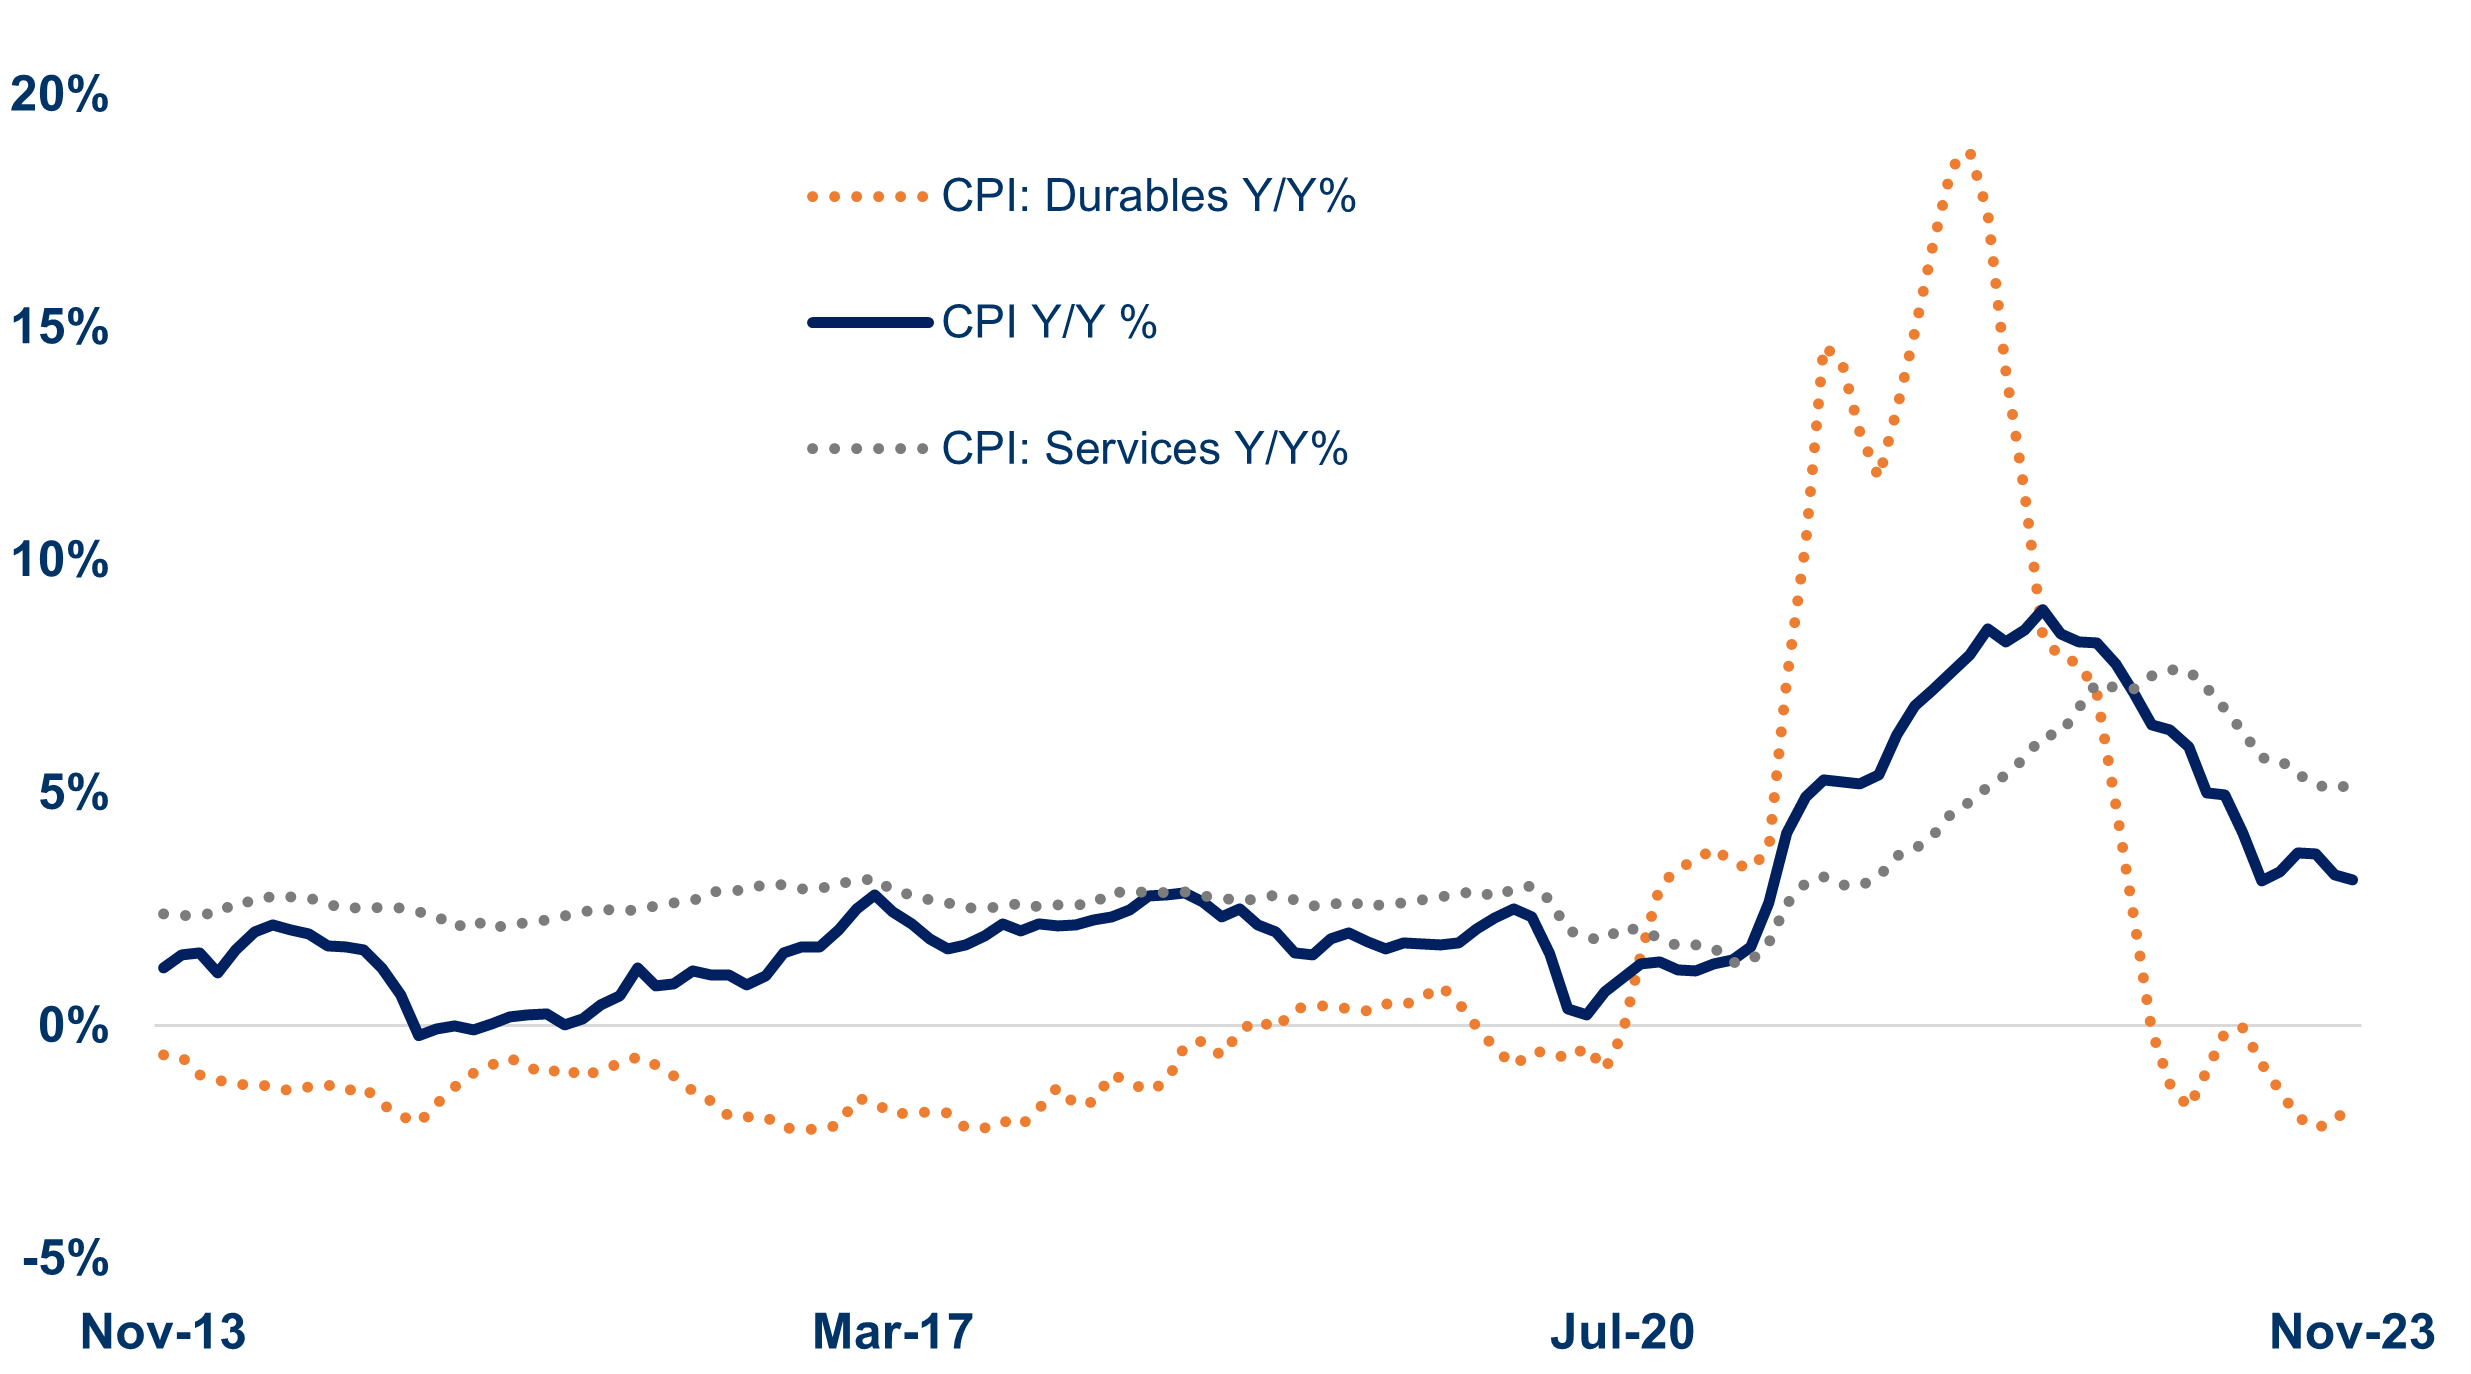 Line graph of CPI durables and services year-over-year from Nov. 2013 to Nov. 2023 as described in the preceding paragraph. 